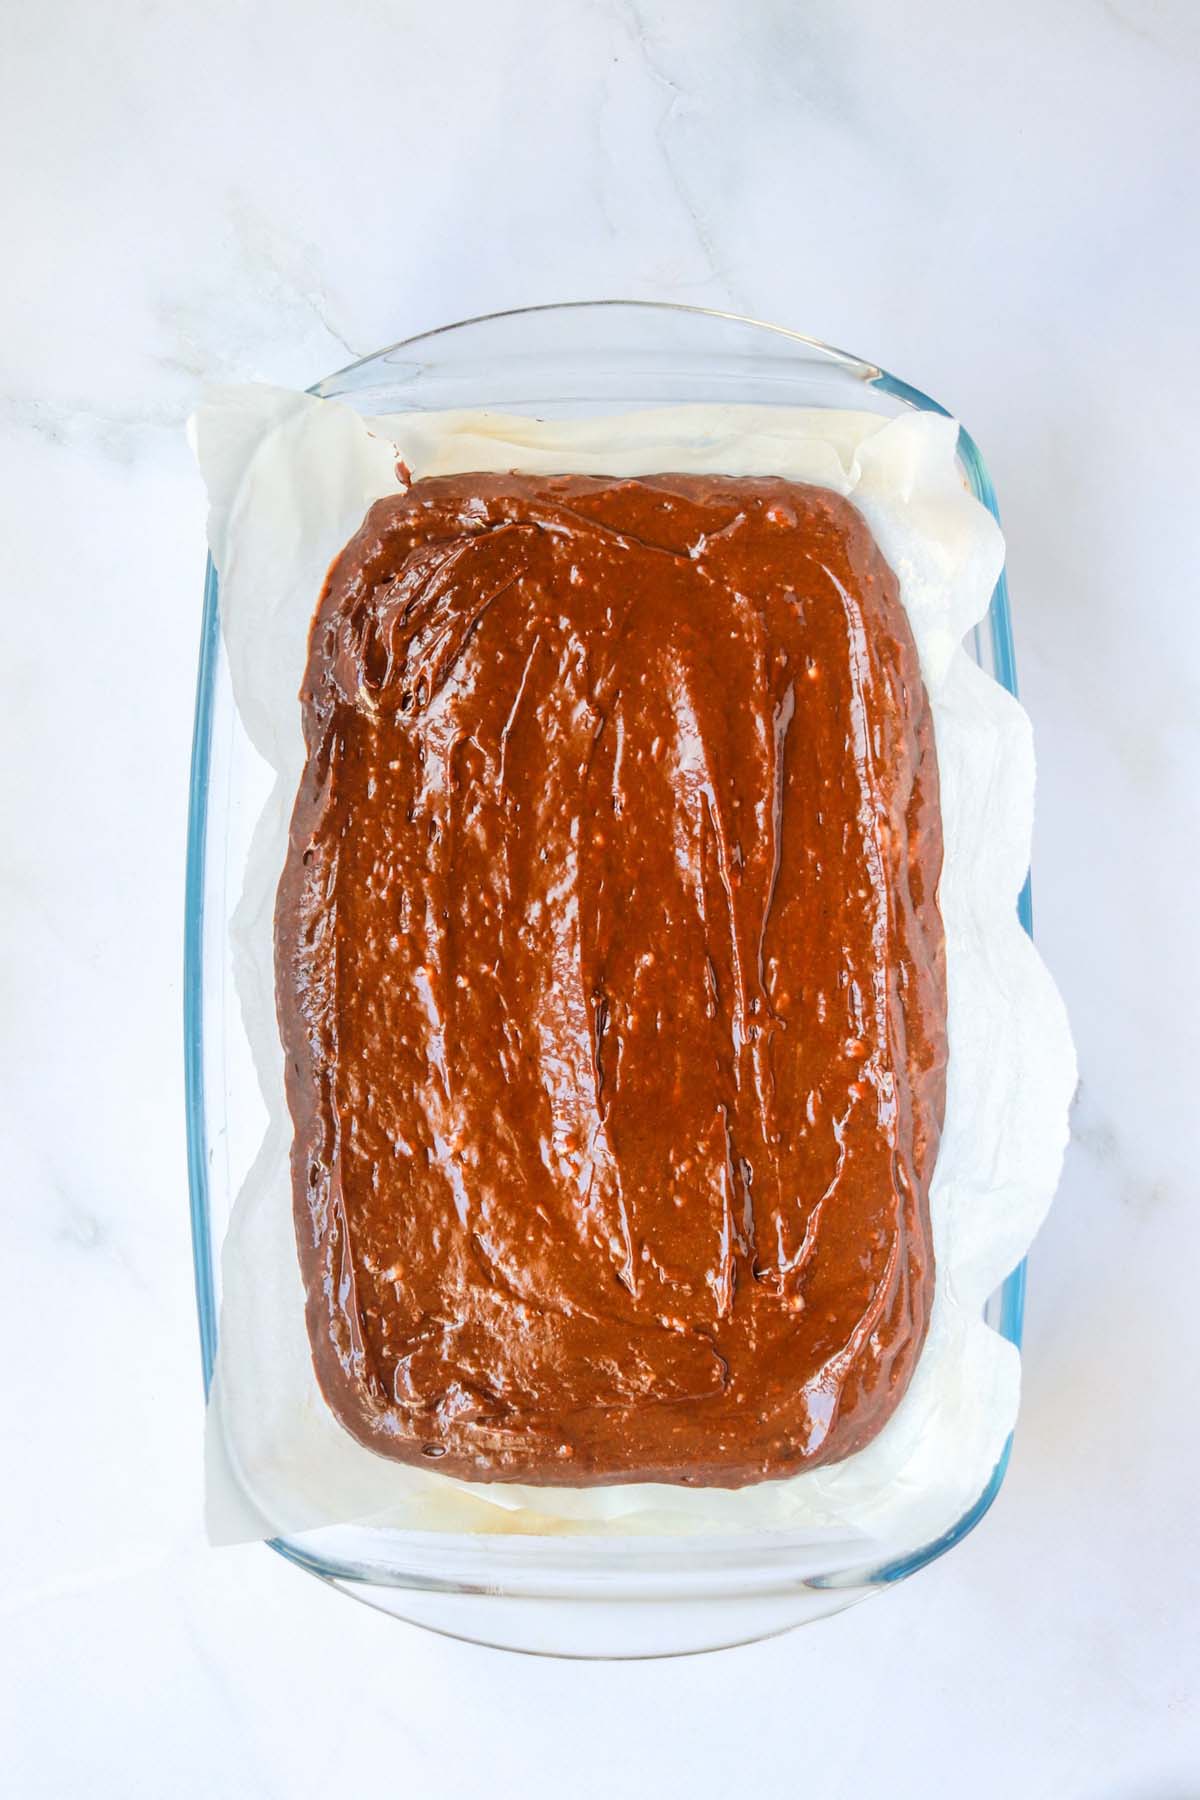 Brownie batter spread out in a baking dish lined with parchment paper.